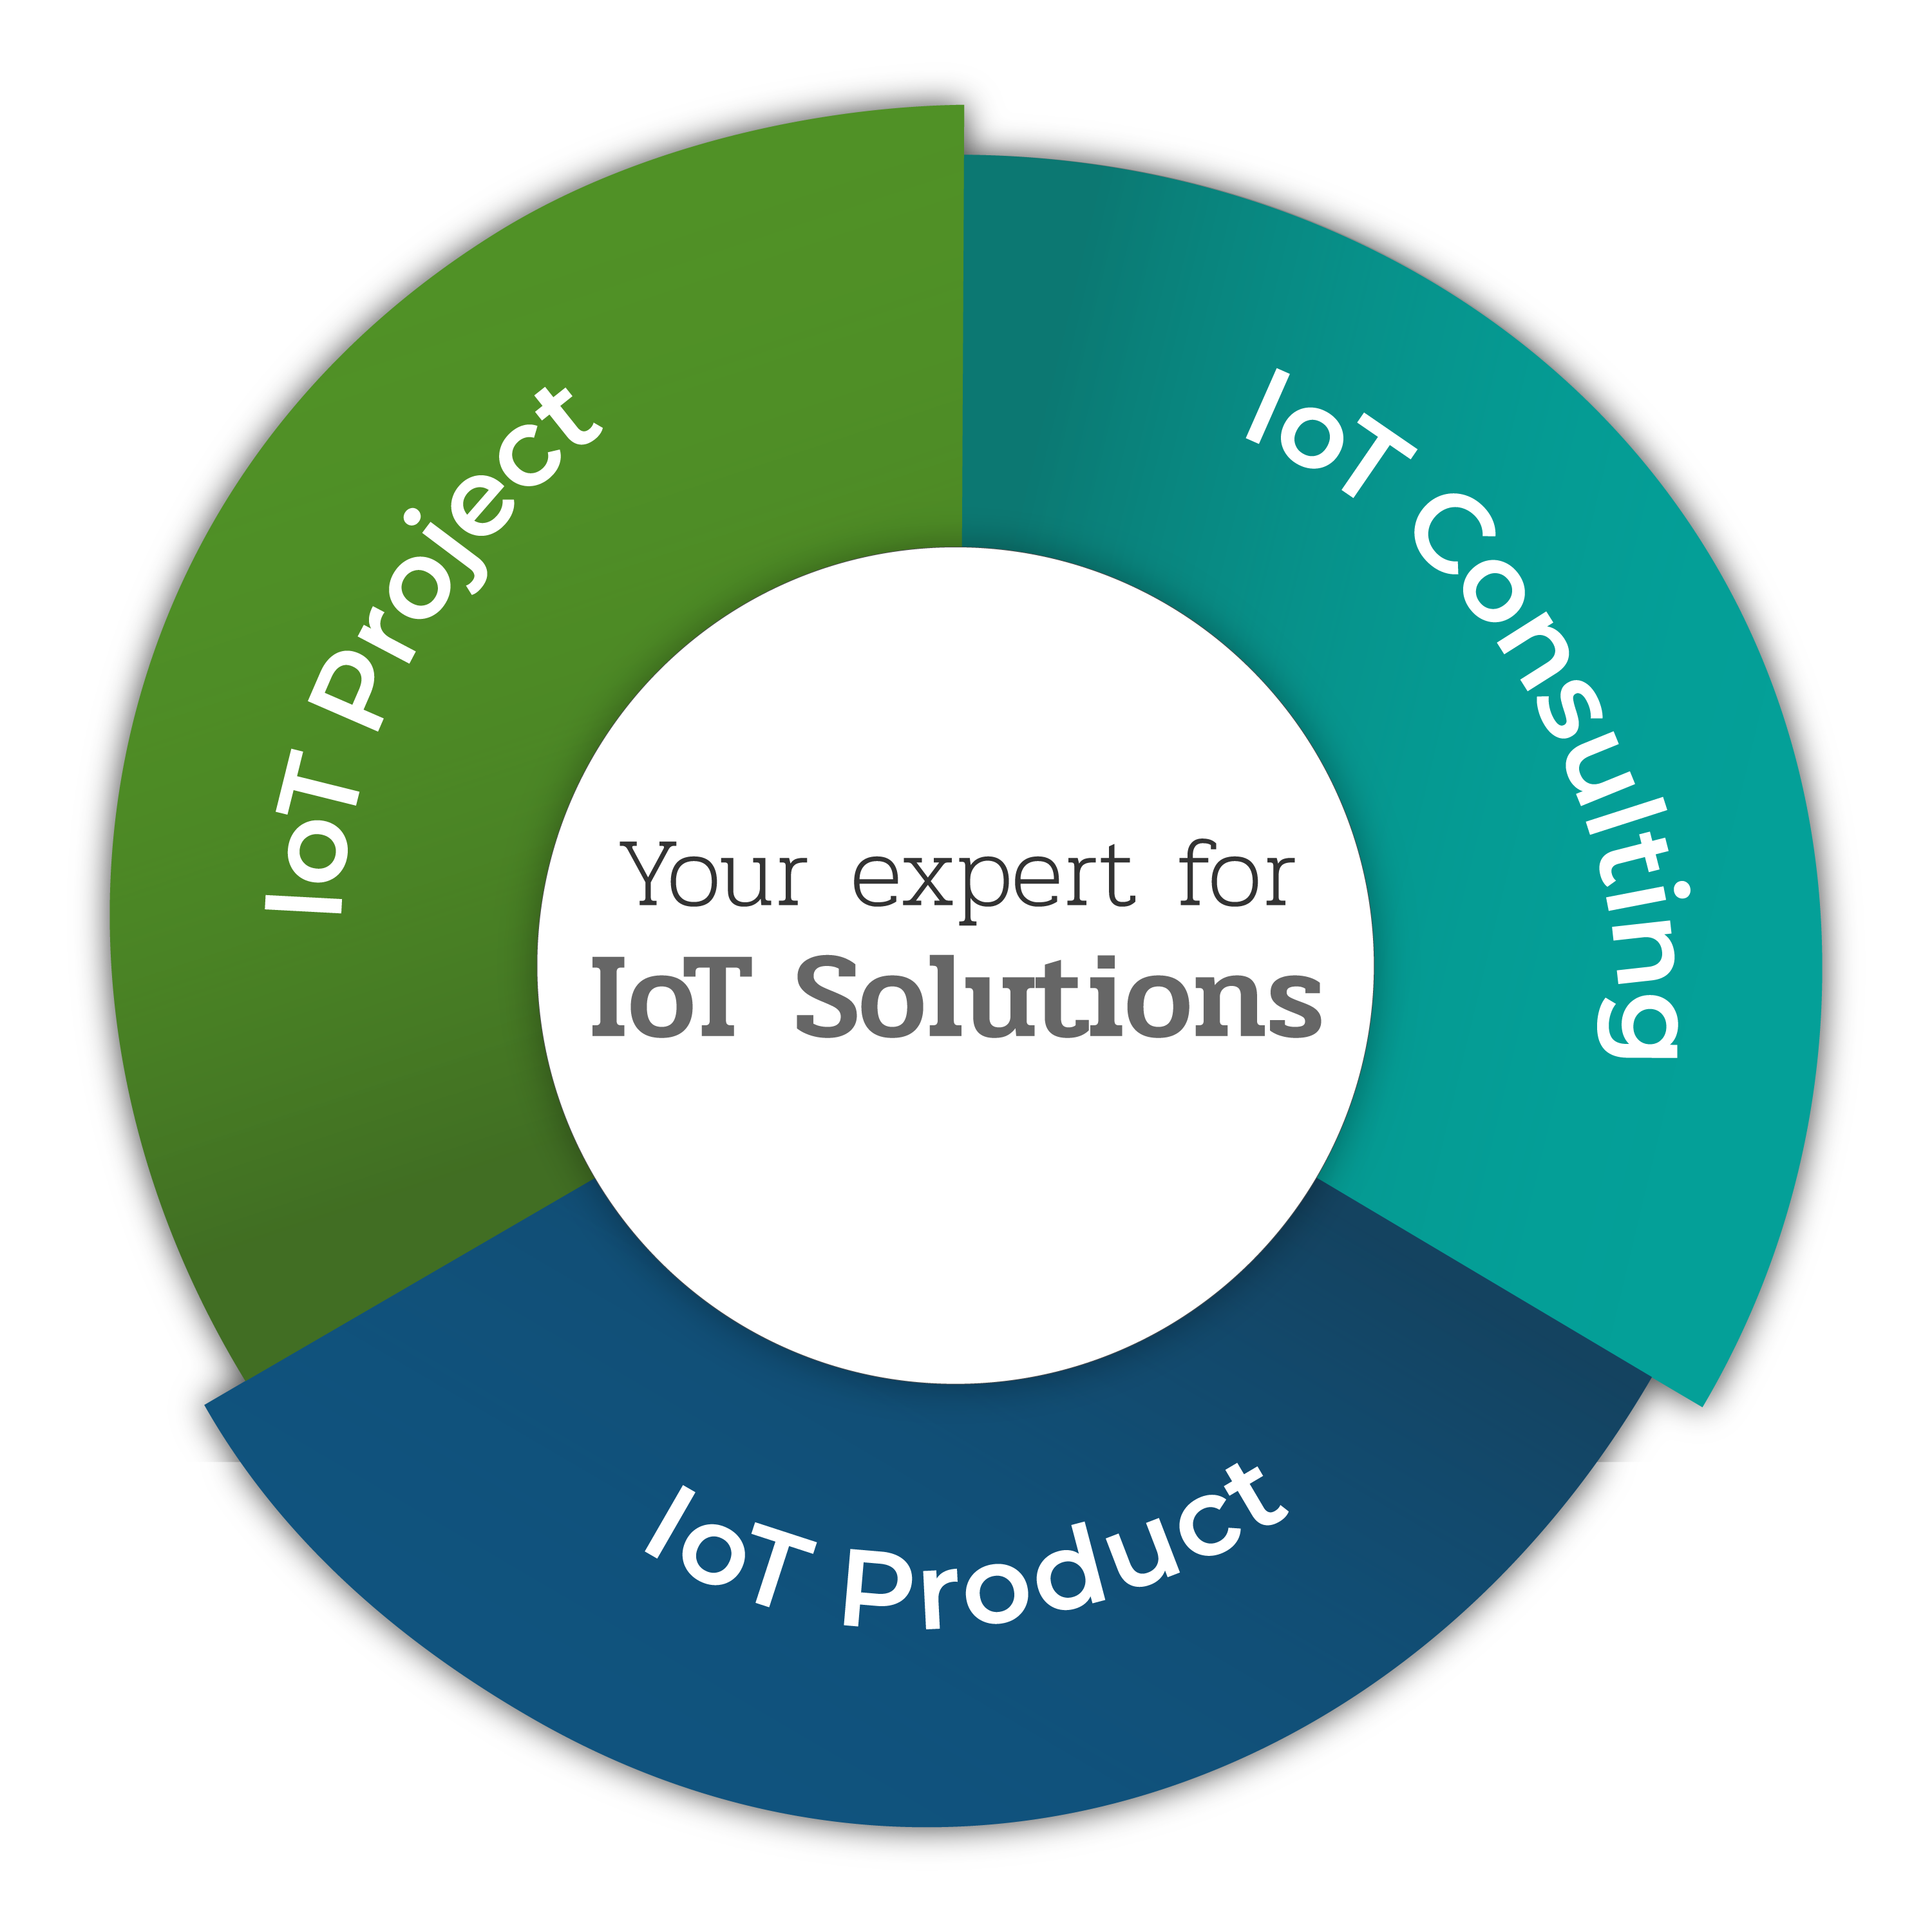 IoT products, IoT consulting, IoT projects